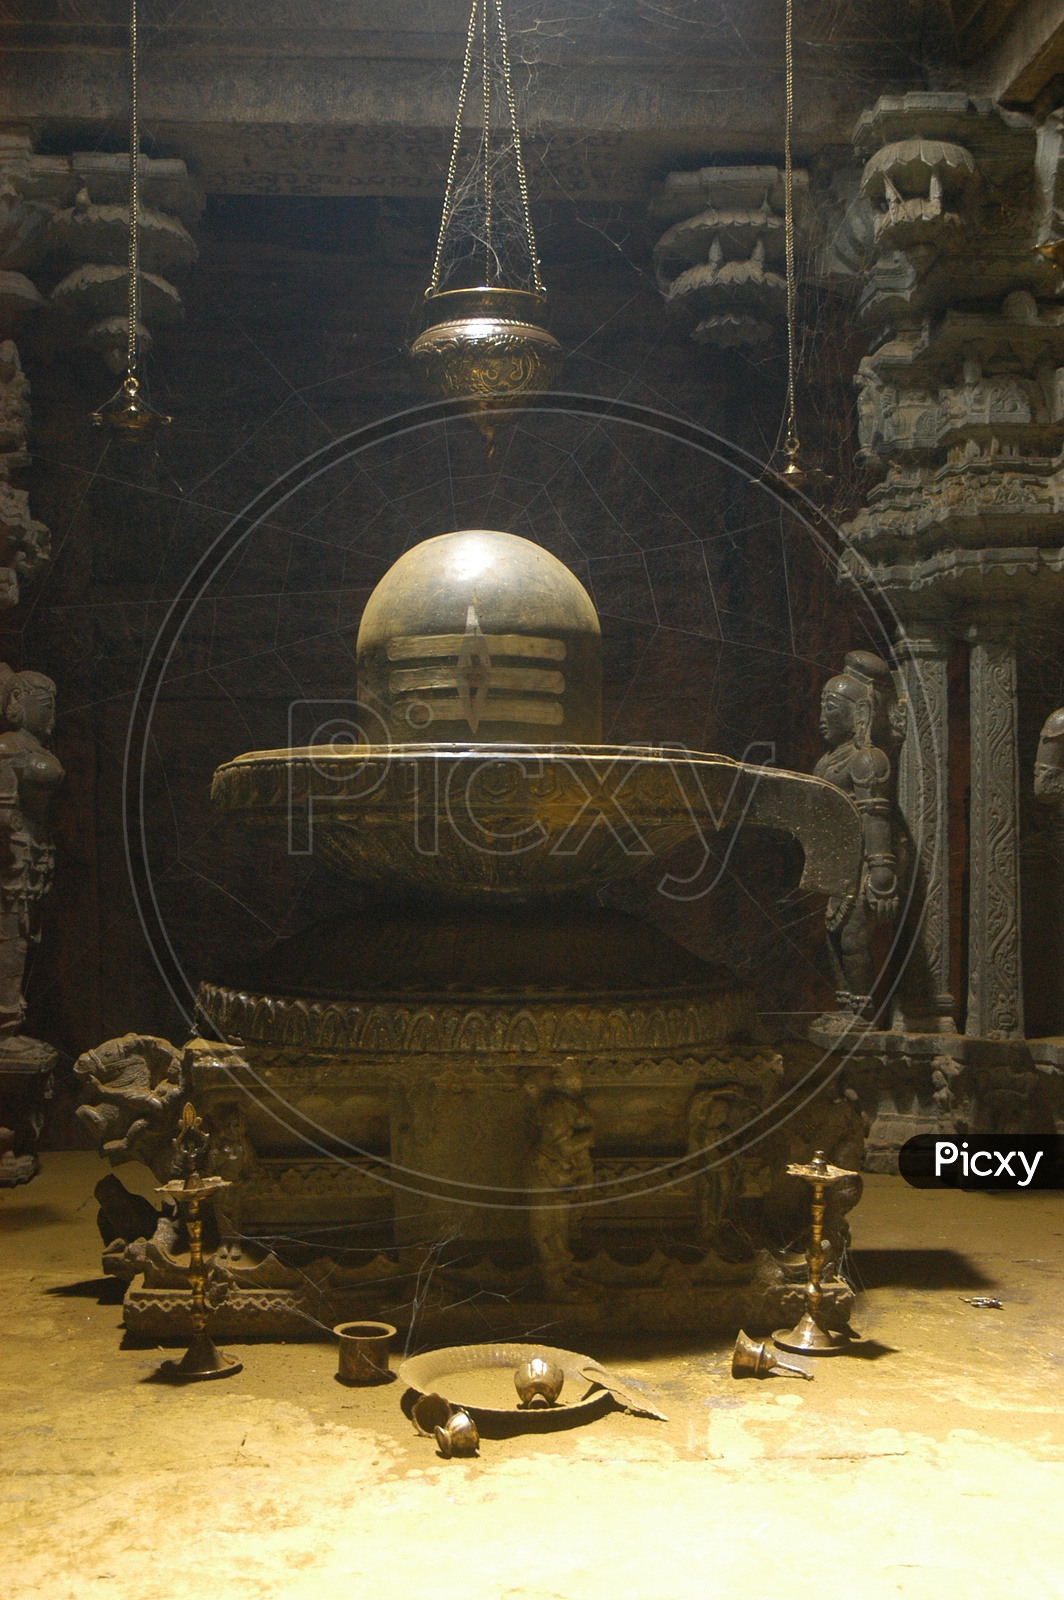 Image of Lord Shiva Lingam in a Old Temple-XK710018-Picxy